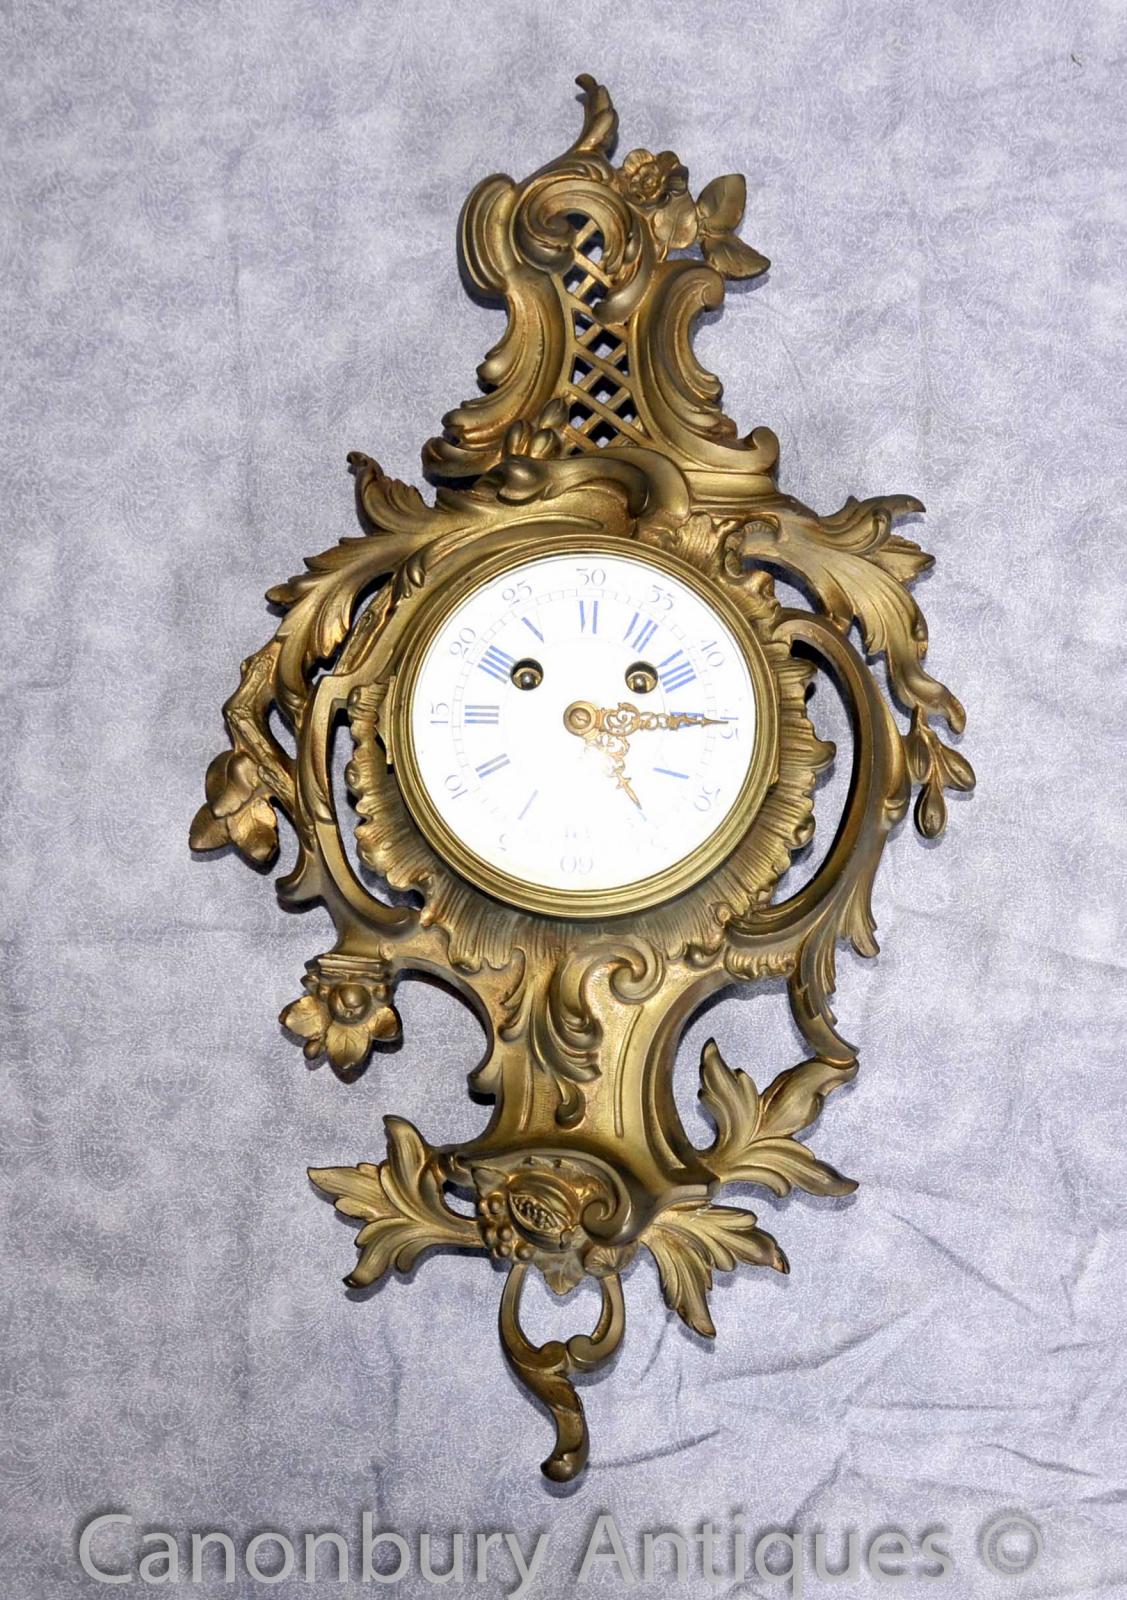 French Wall Clock Louis Xvi Ormolu Rococo French Clocks According to one source, its proper name was a jibert cathcode troisieme timepiece. canonbury antiques